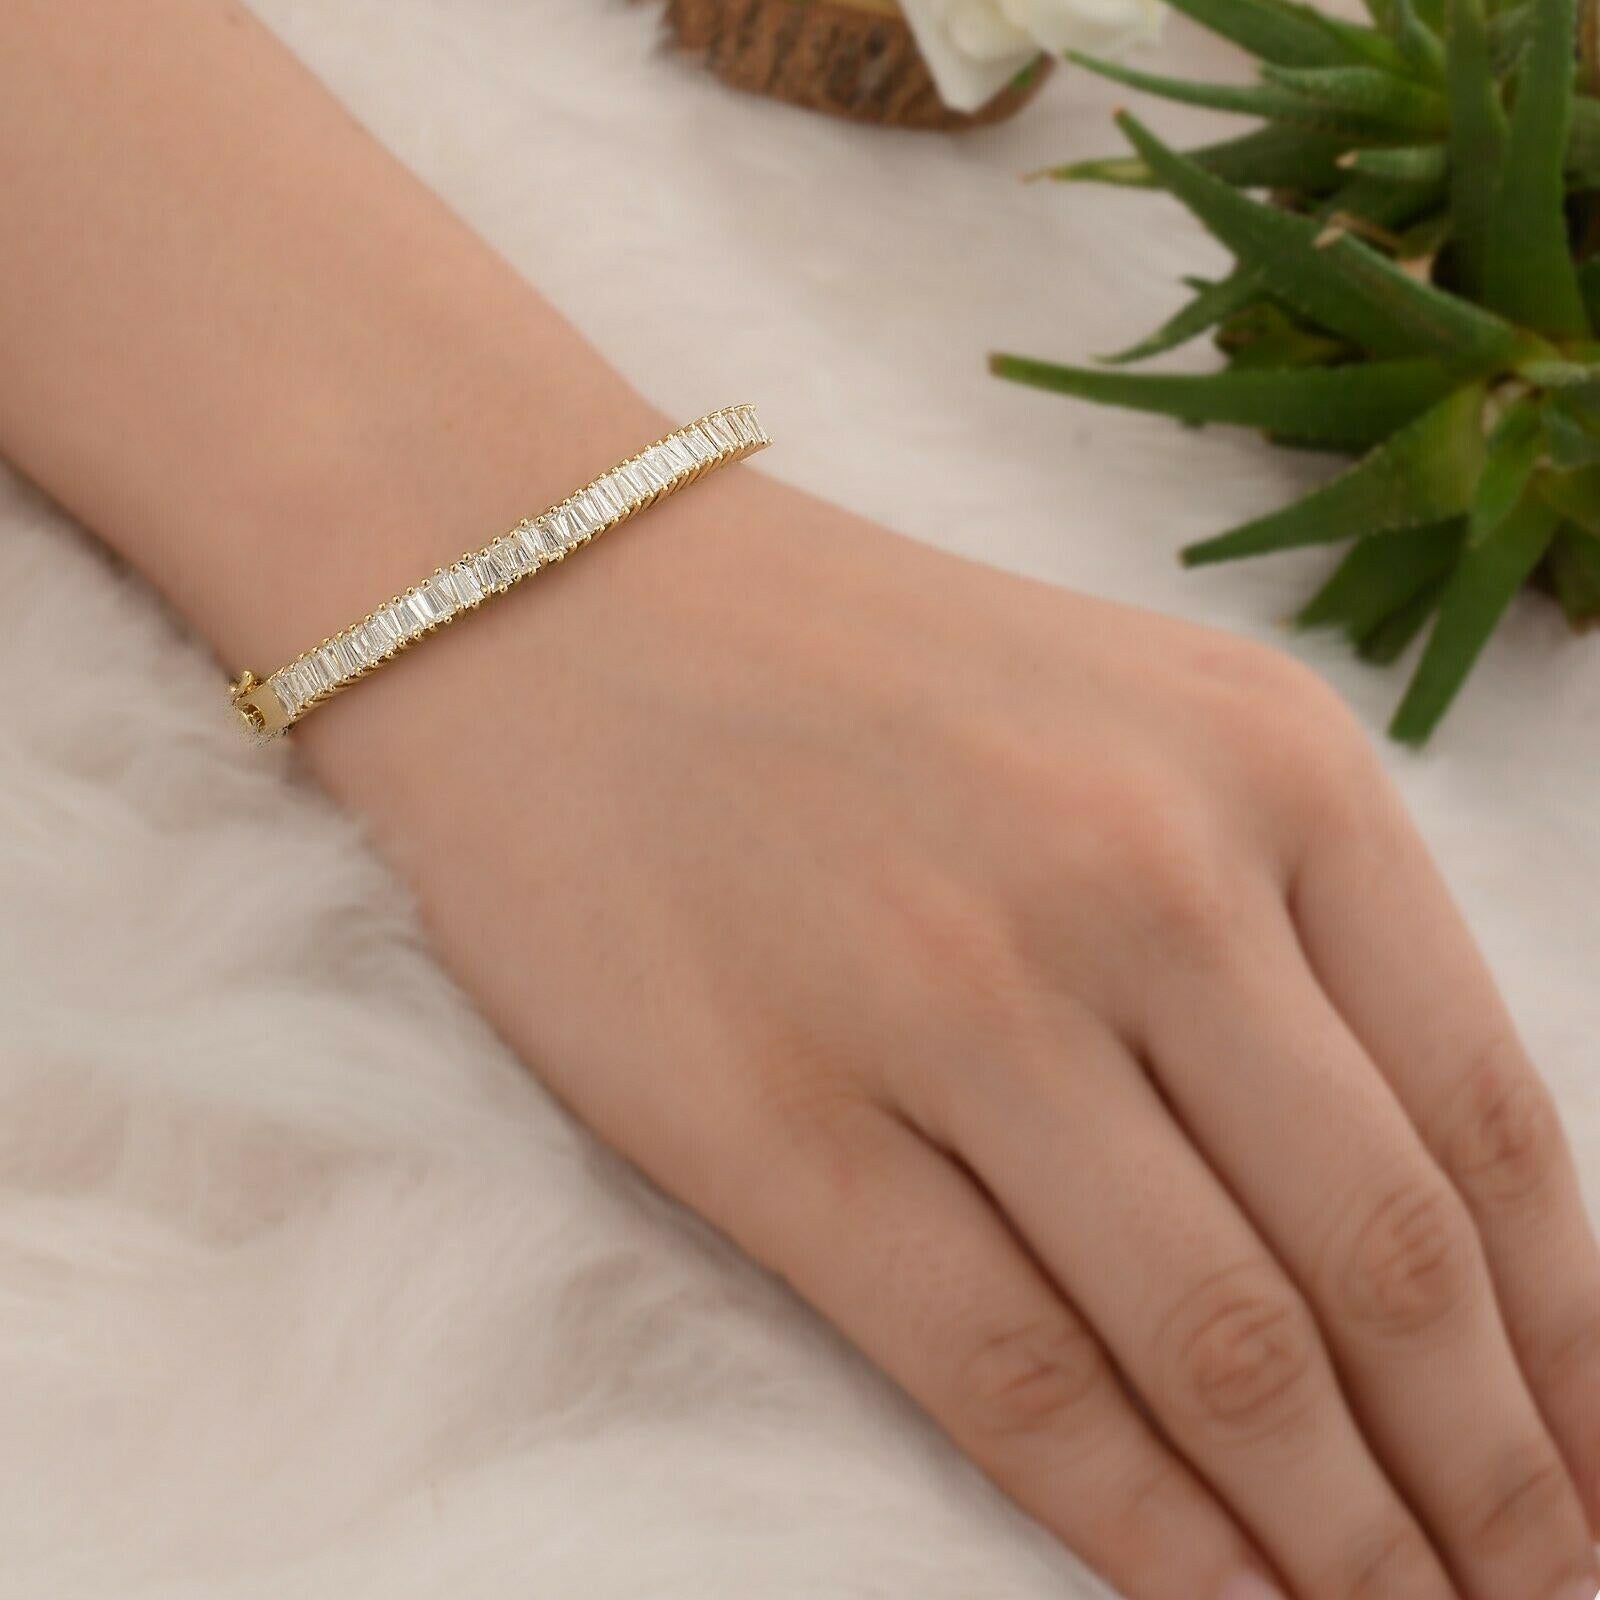 A stunning bracelet handmade in 14K gold. It is set in 2.45 carats of baguette diamonds. Wear it alone or stack it with your favorite pieces.

FOLLOW MEGHNA JEWELS storefront to view the latest collection & exclusive pieces. Meghna Jewels is proudly